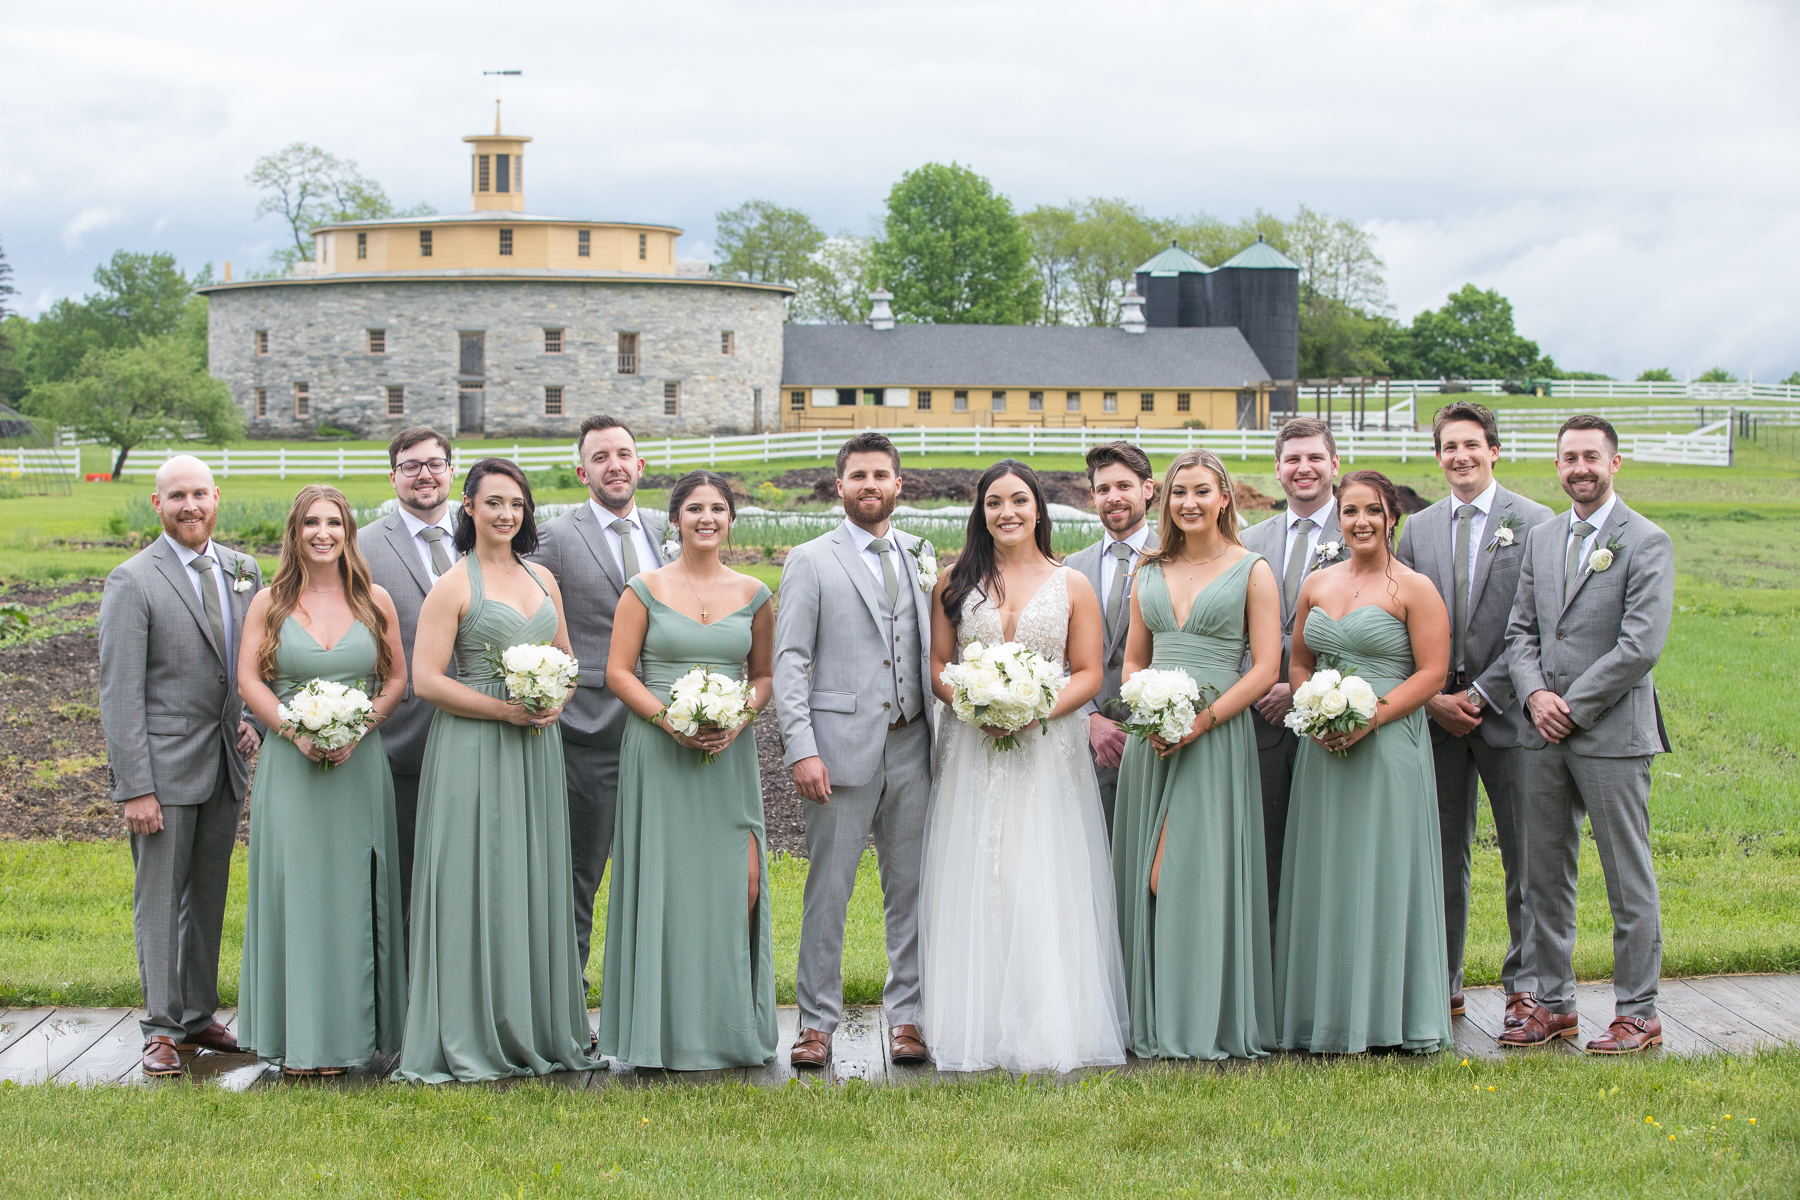 A group photo of the wedding party at Hancock Shaker Village.